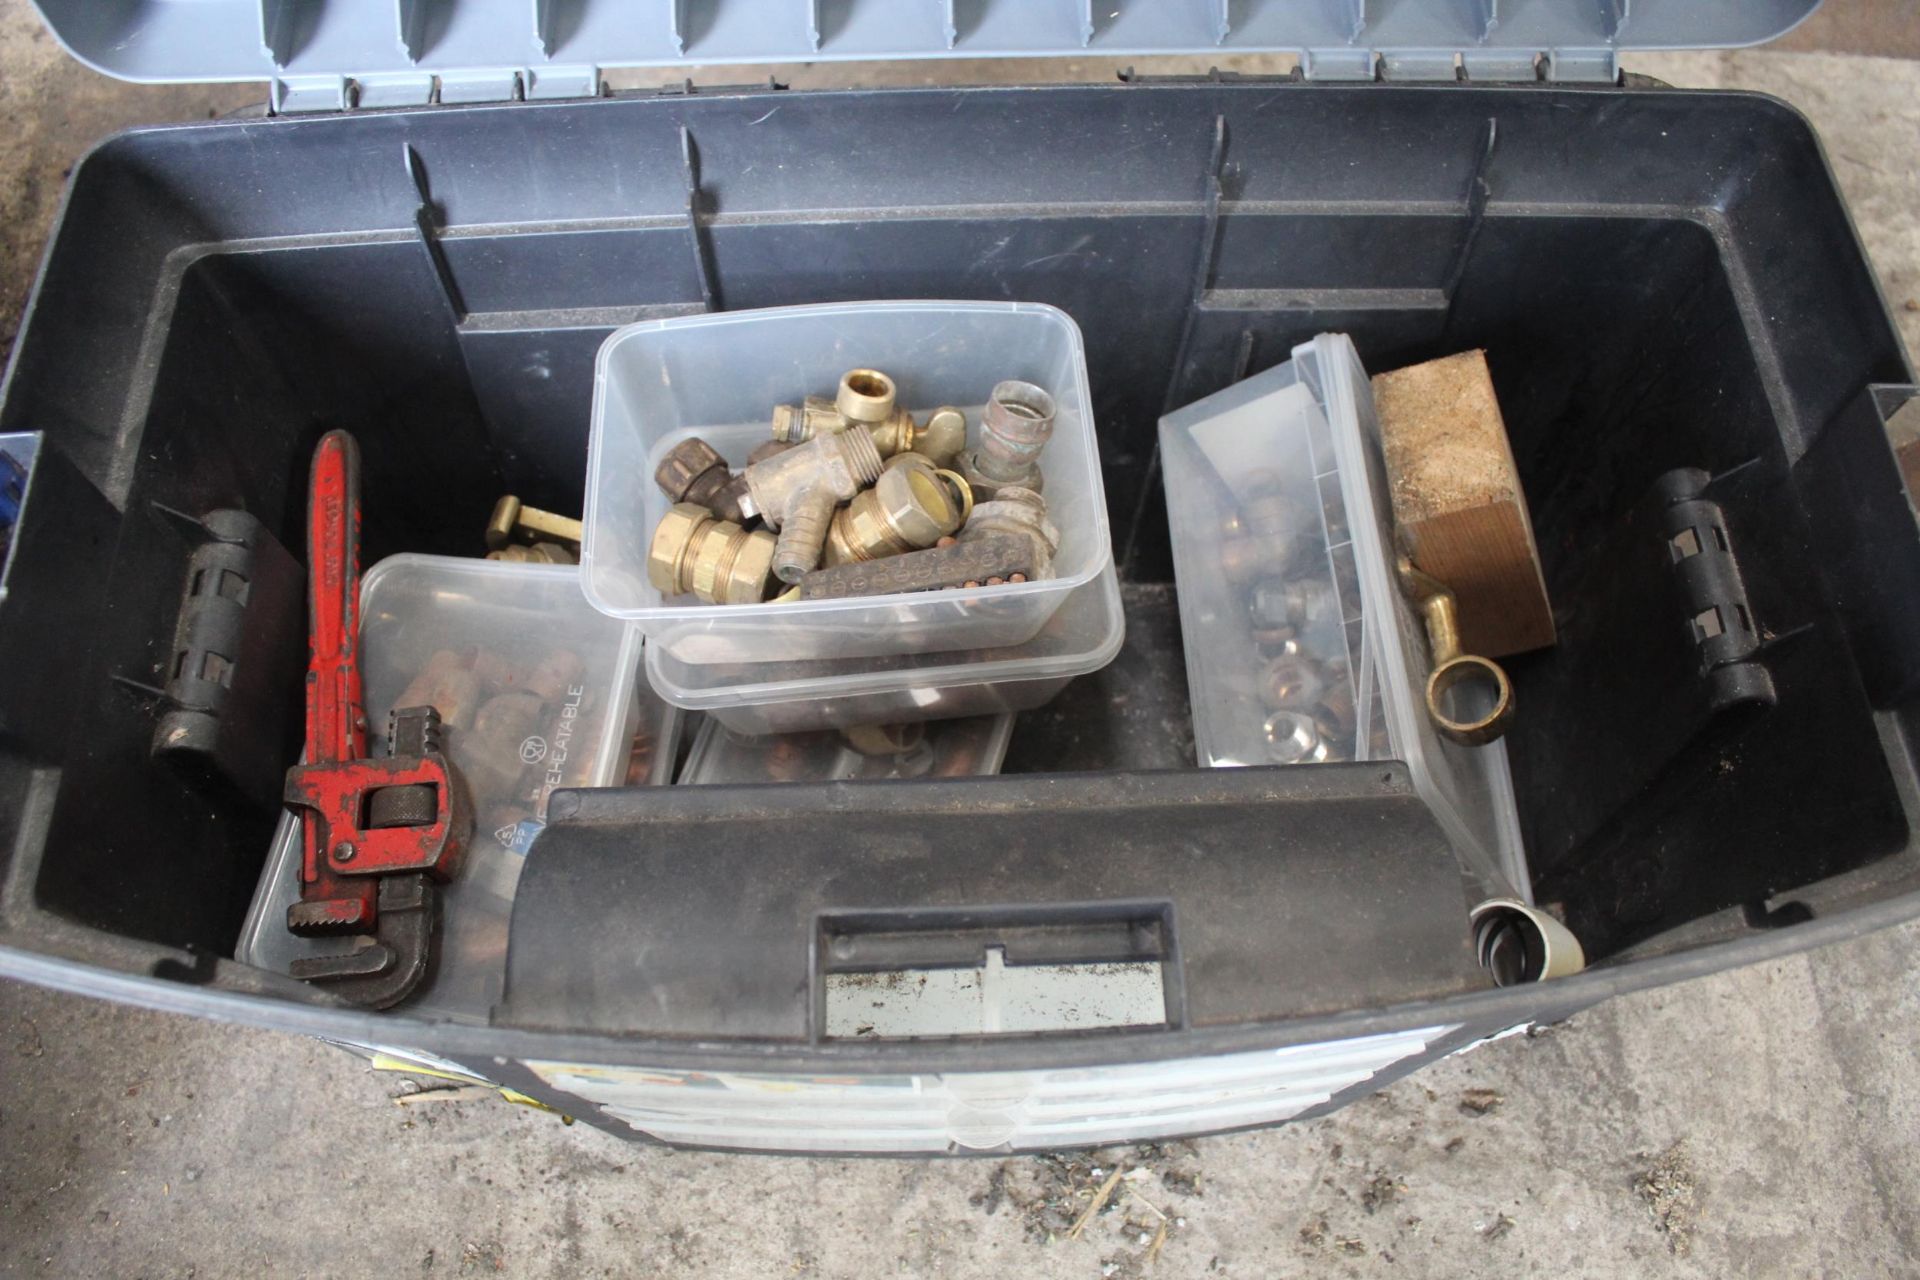 A PLASTIC TOOL BOX WITH AN ASSORTMENT OF BRASS PIPE FITTINGS AND A PAIR OF STILSENS - Image 2 of 2